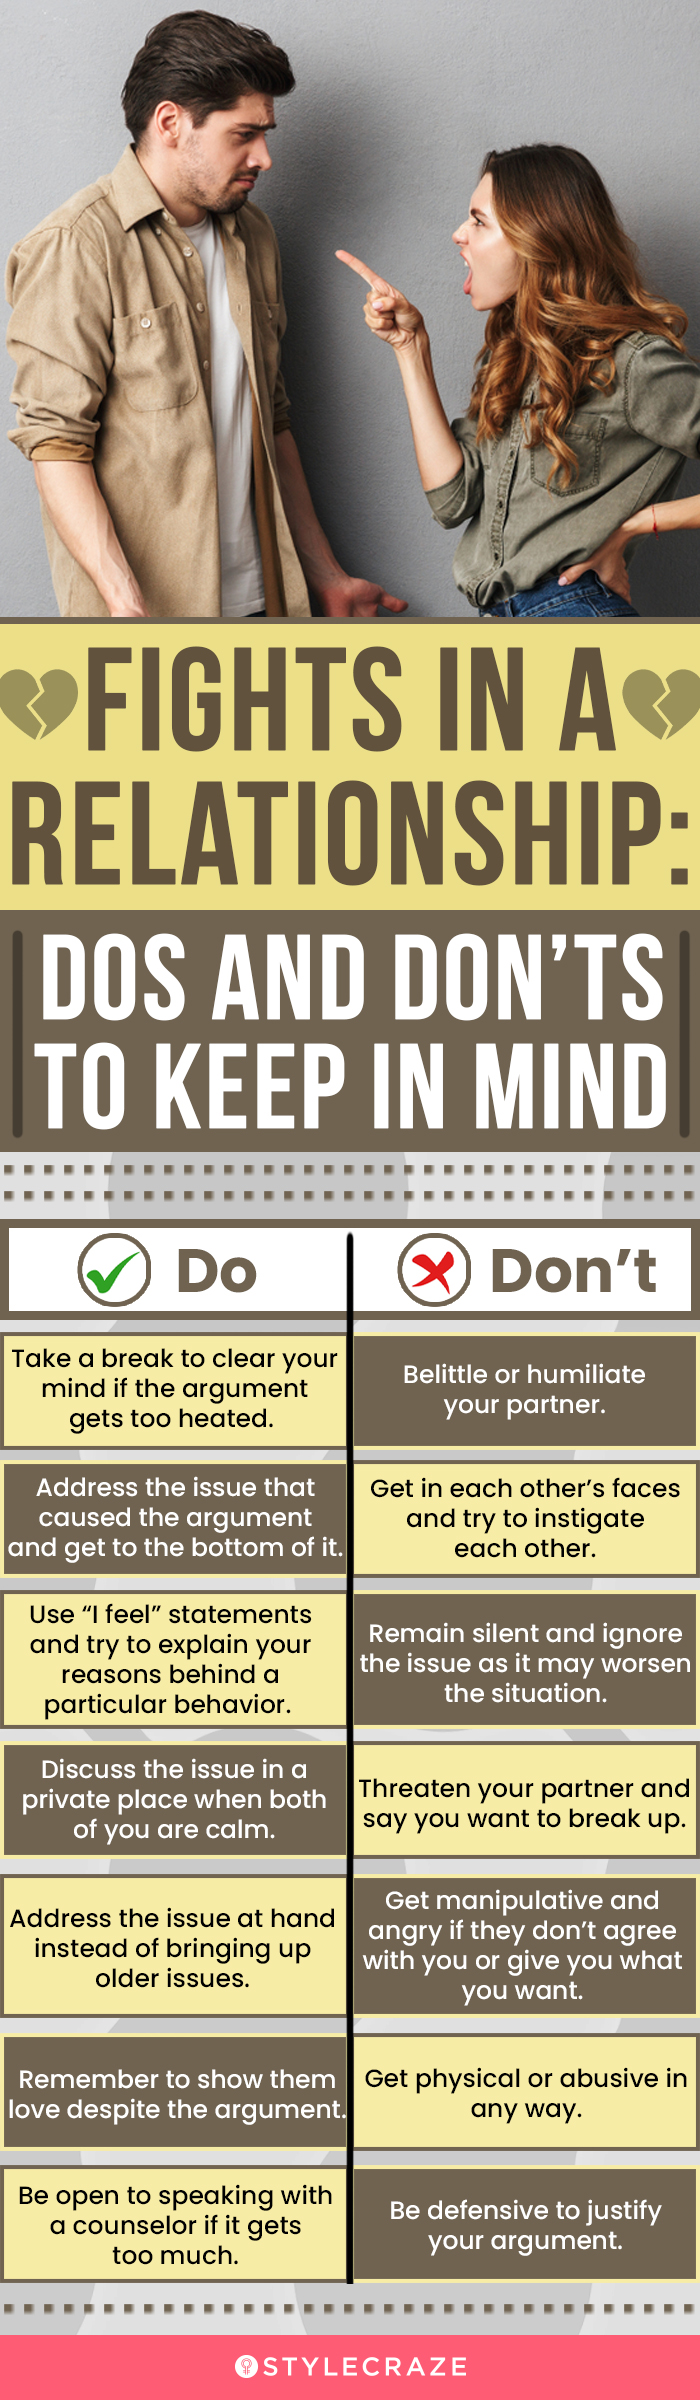 relationship fights dos and don’ts to keep in mind (infographic)